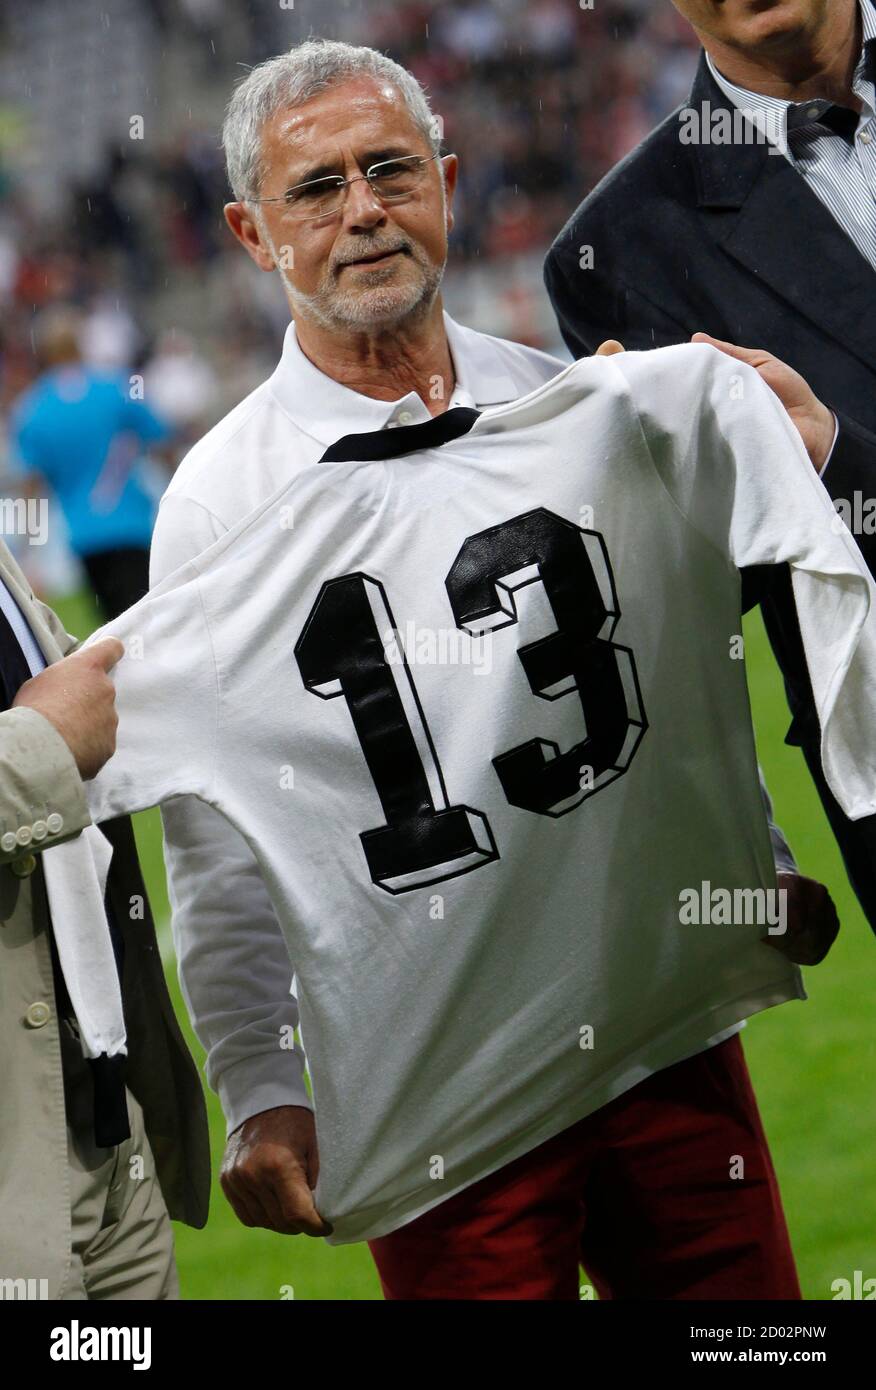 German soccer legend Gerd Mueller holds up his jersey before a friendly  soccer match between Bayern Munich and the Netherlands in Munich May 22,  2012. Mueller used the jersey during West Germany's